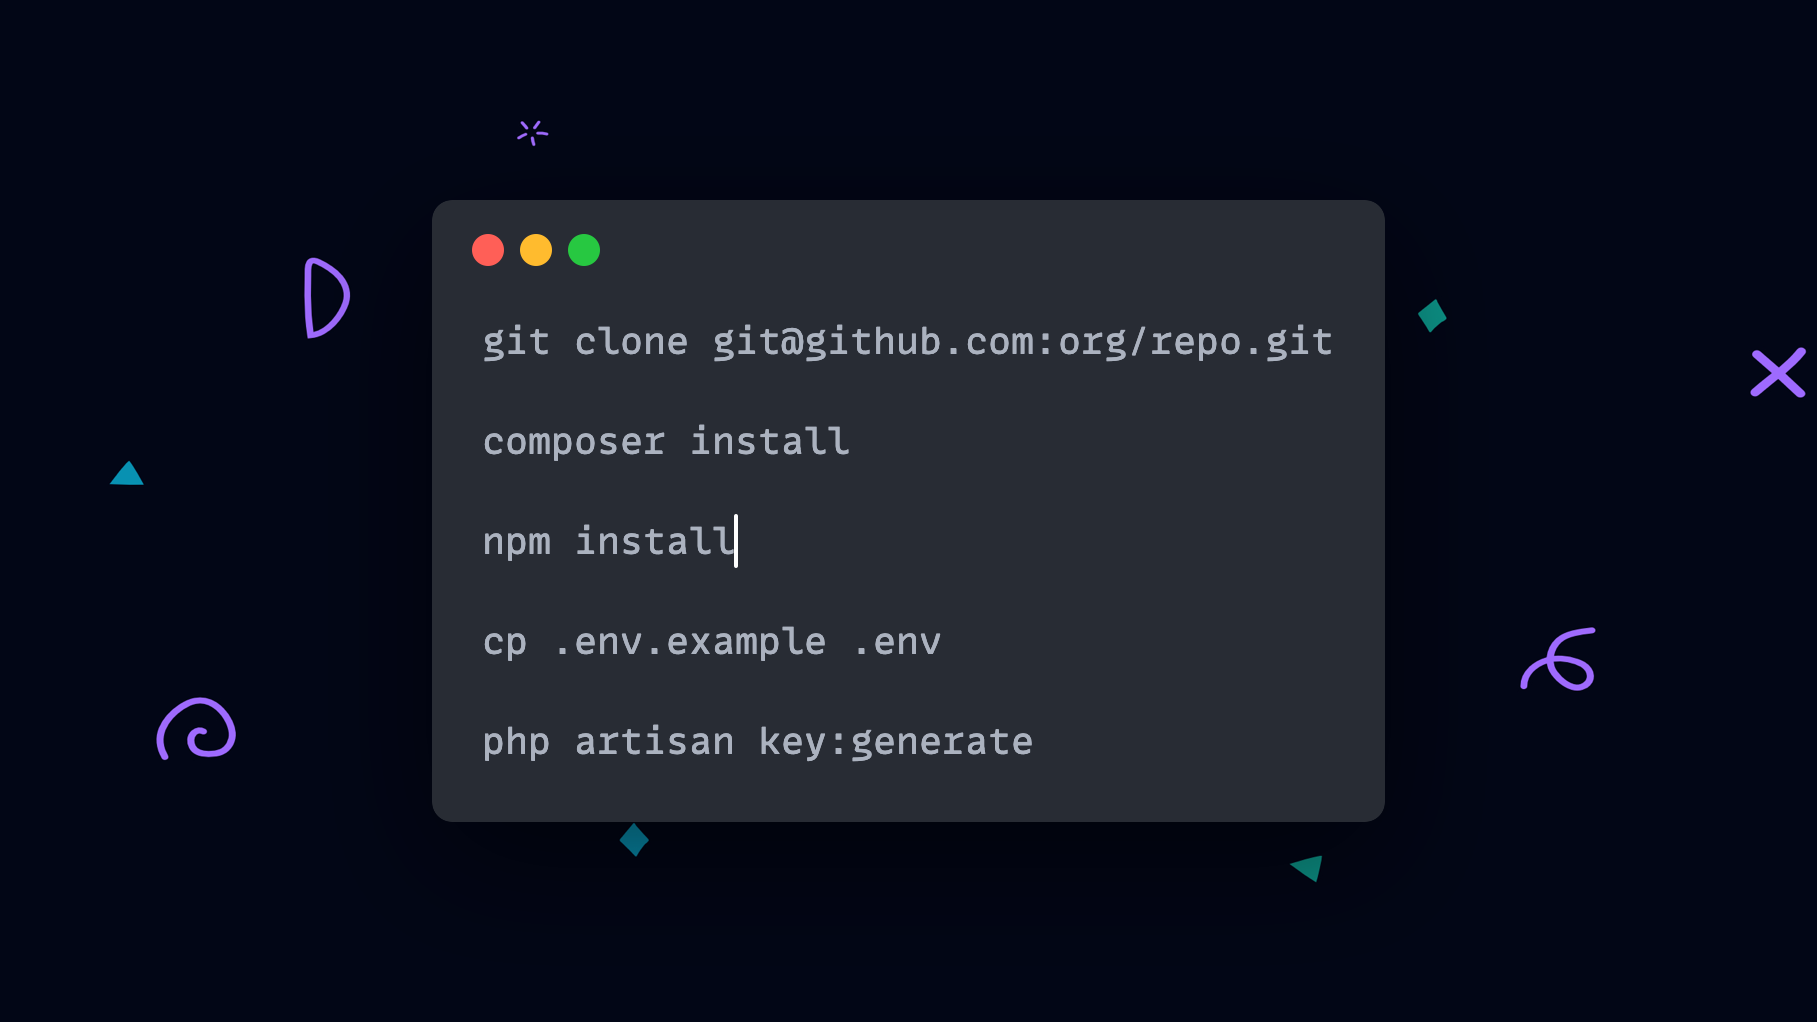 A window with commands to get a repository up and running the commands are as follows: `git clone git@github.com:org/repo.git` `composer install` `npm install` `cp .env.example .env` `php artisan key:generate`